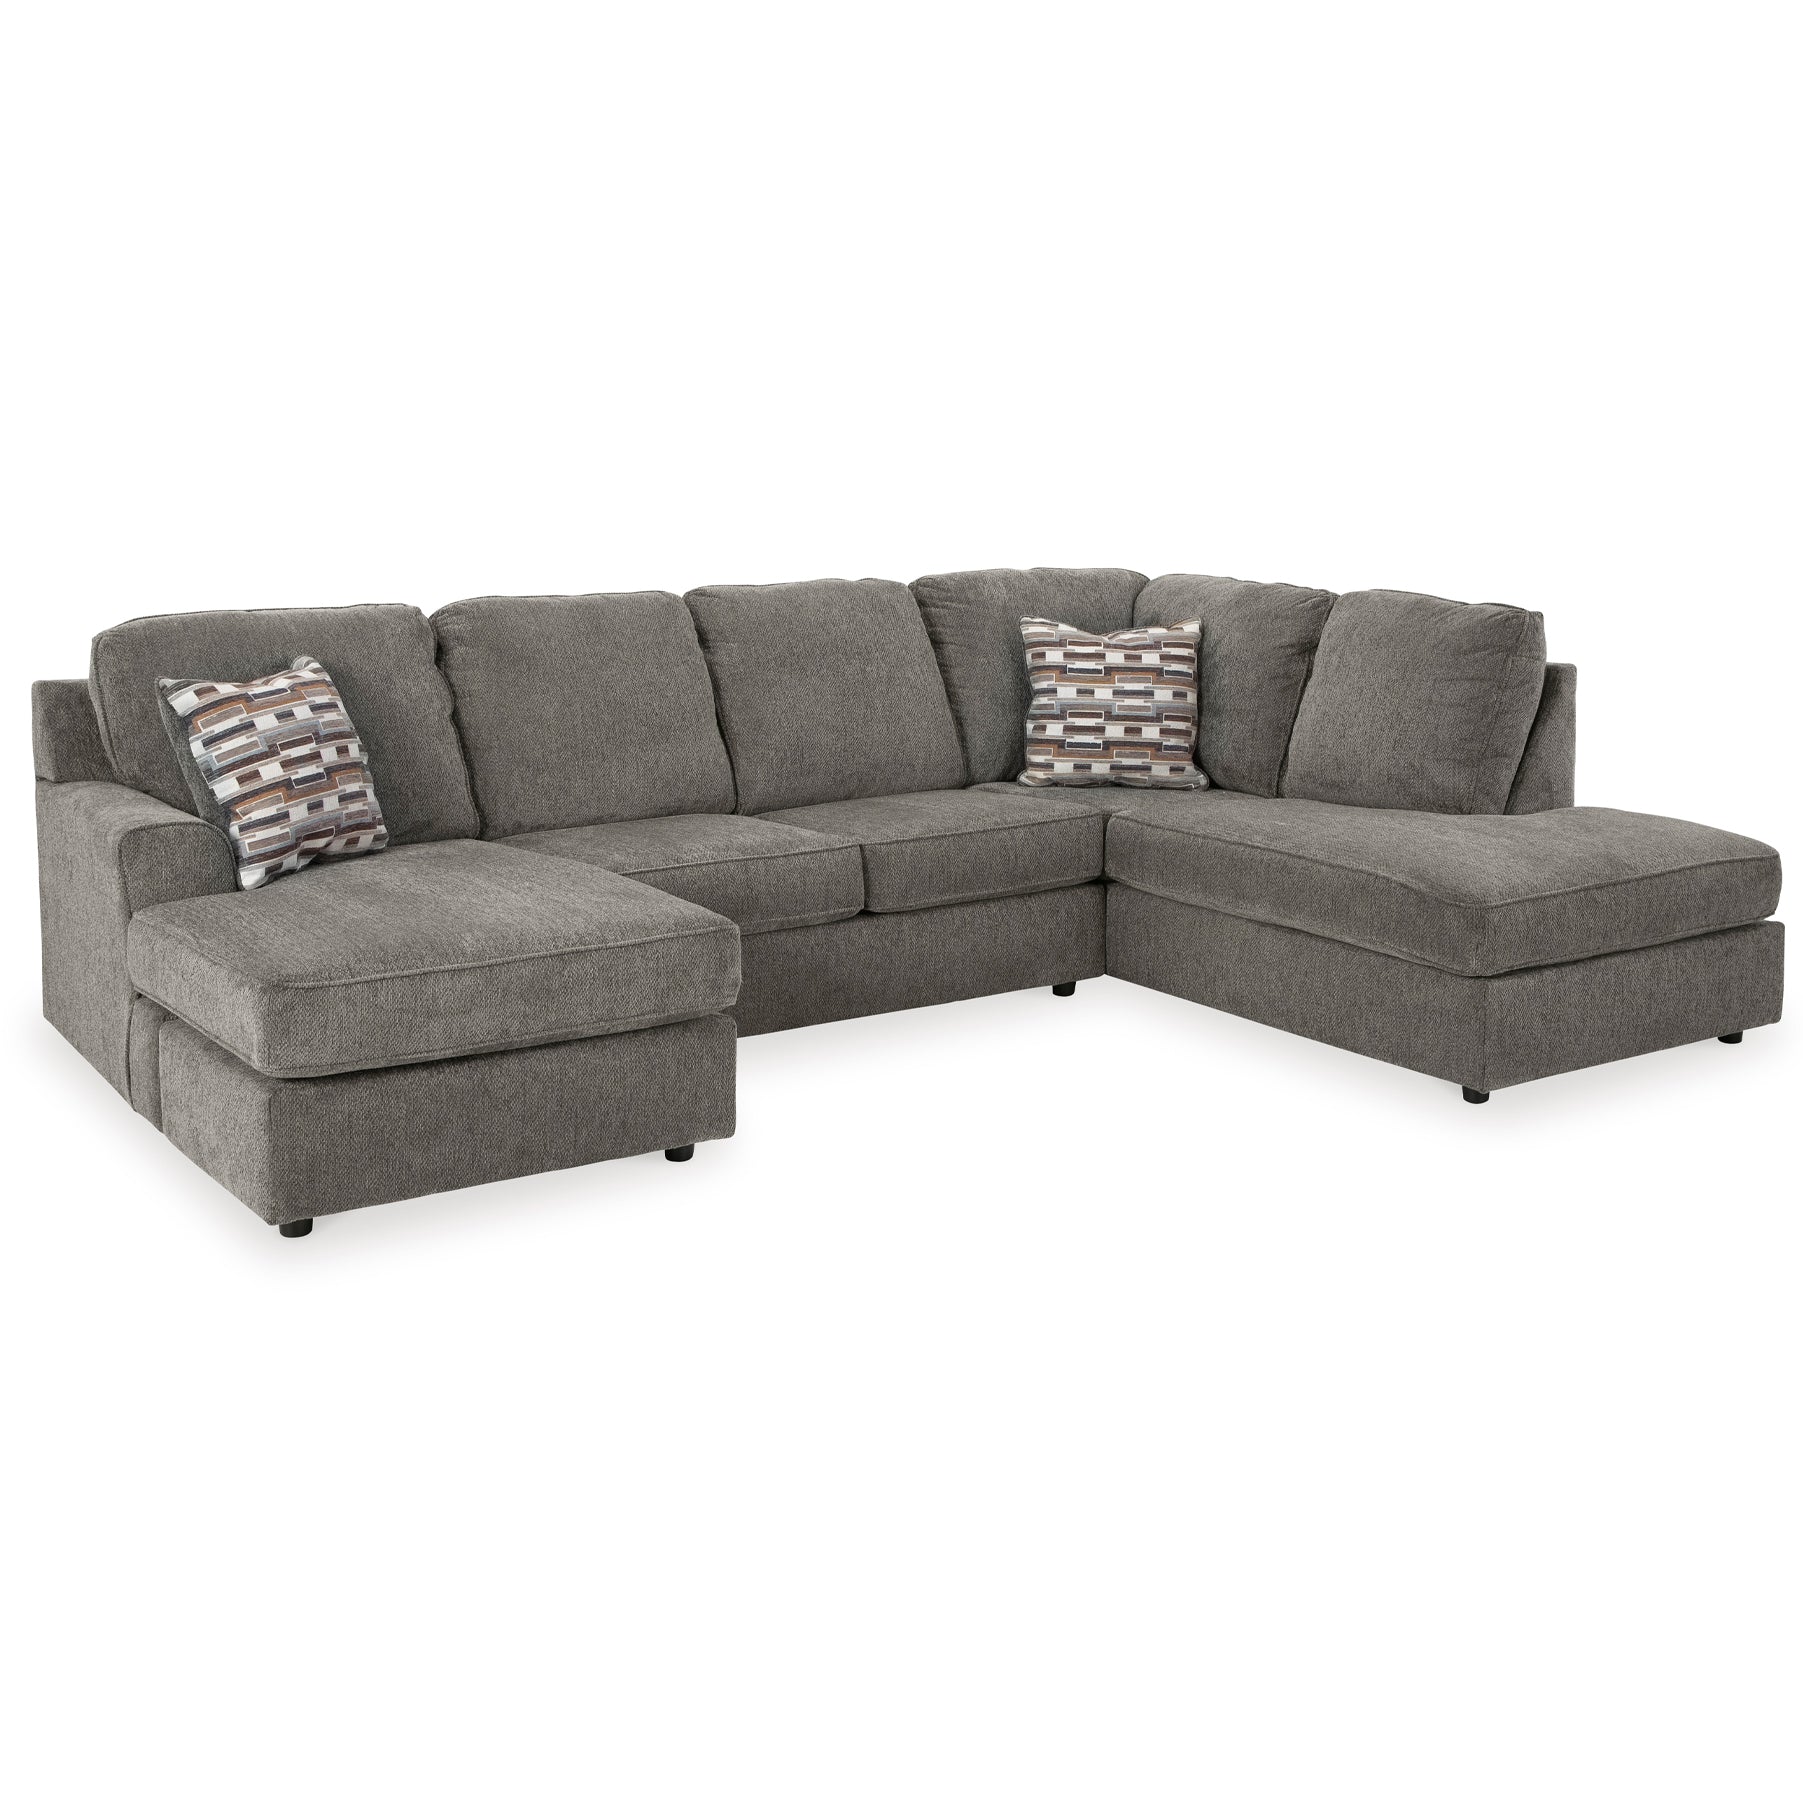 O'Phannon 2-Piece Sectional with Chaise in Putty Color